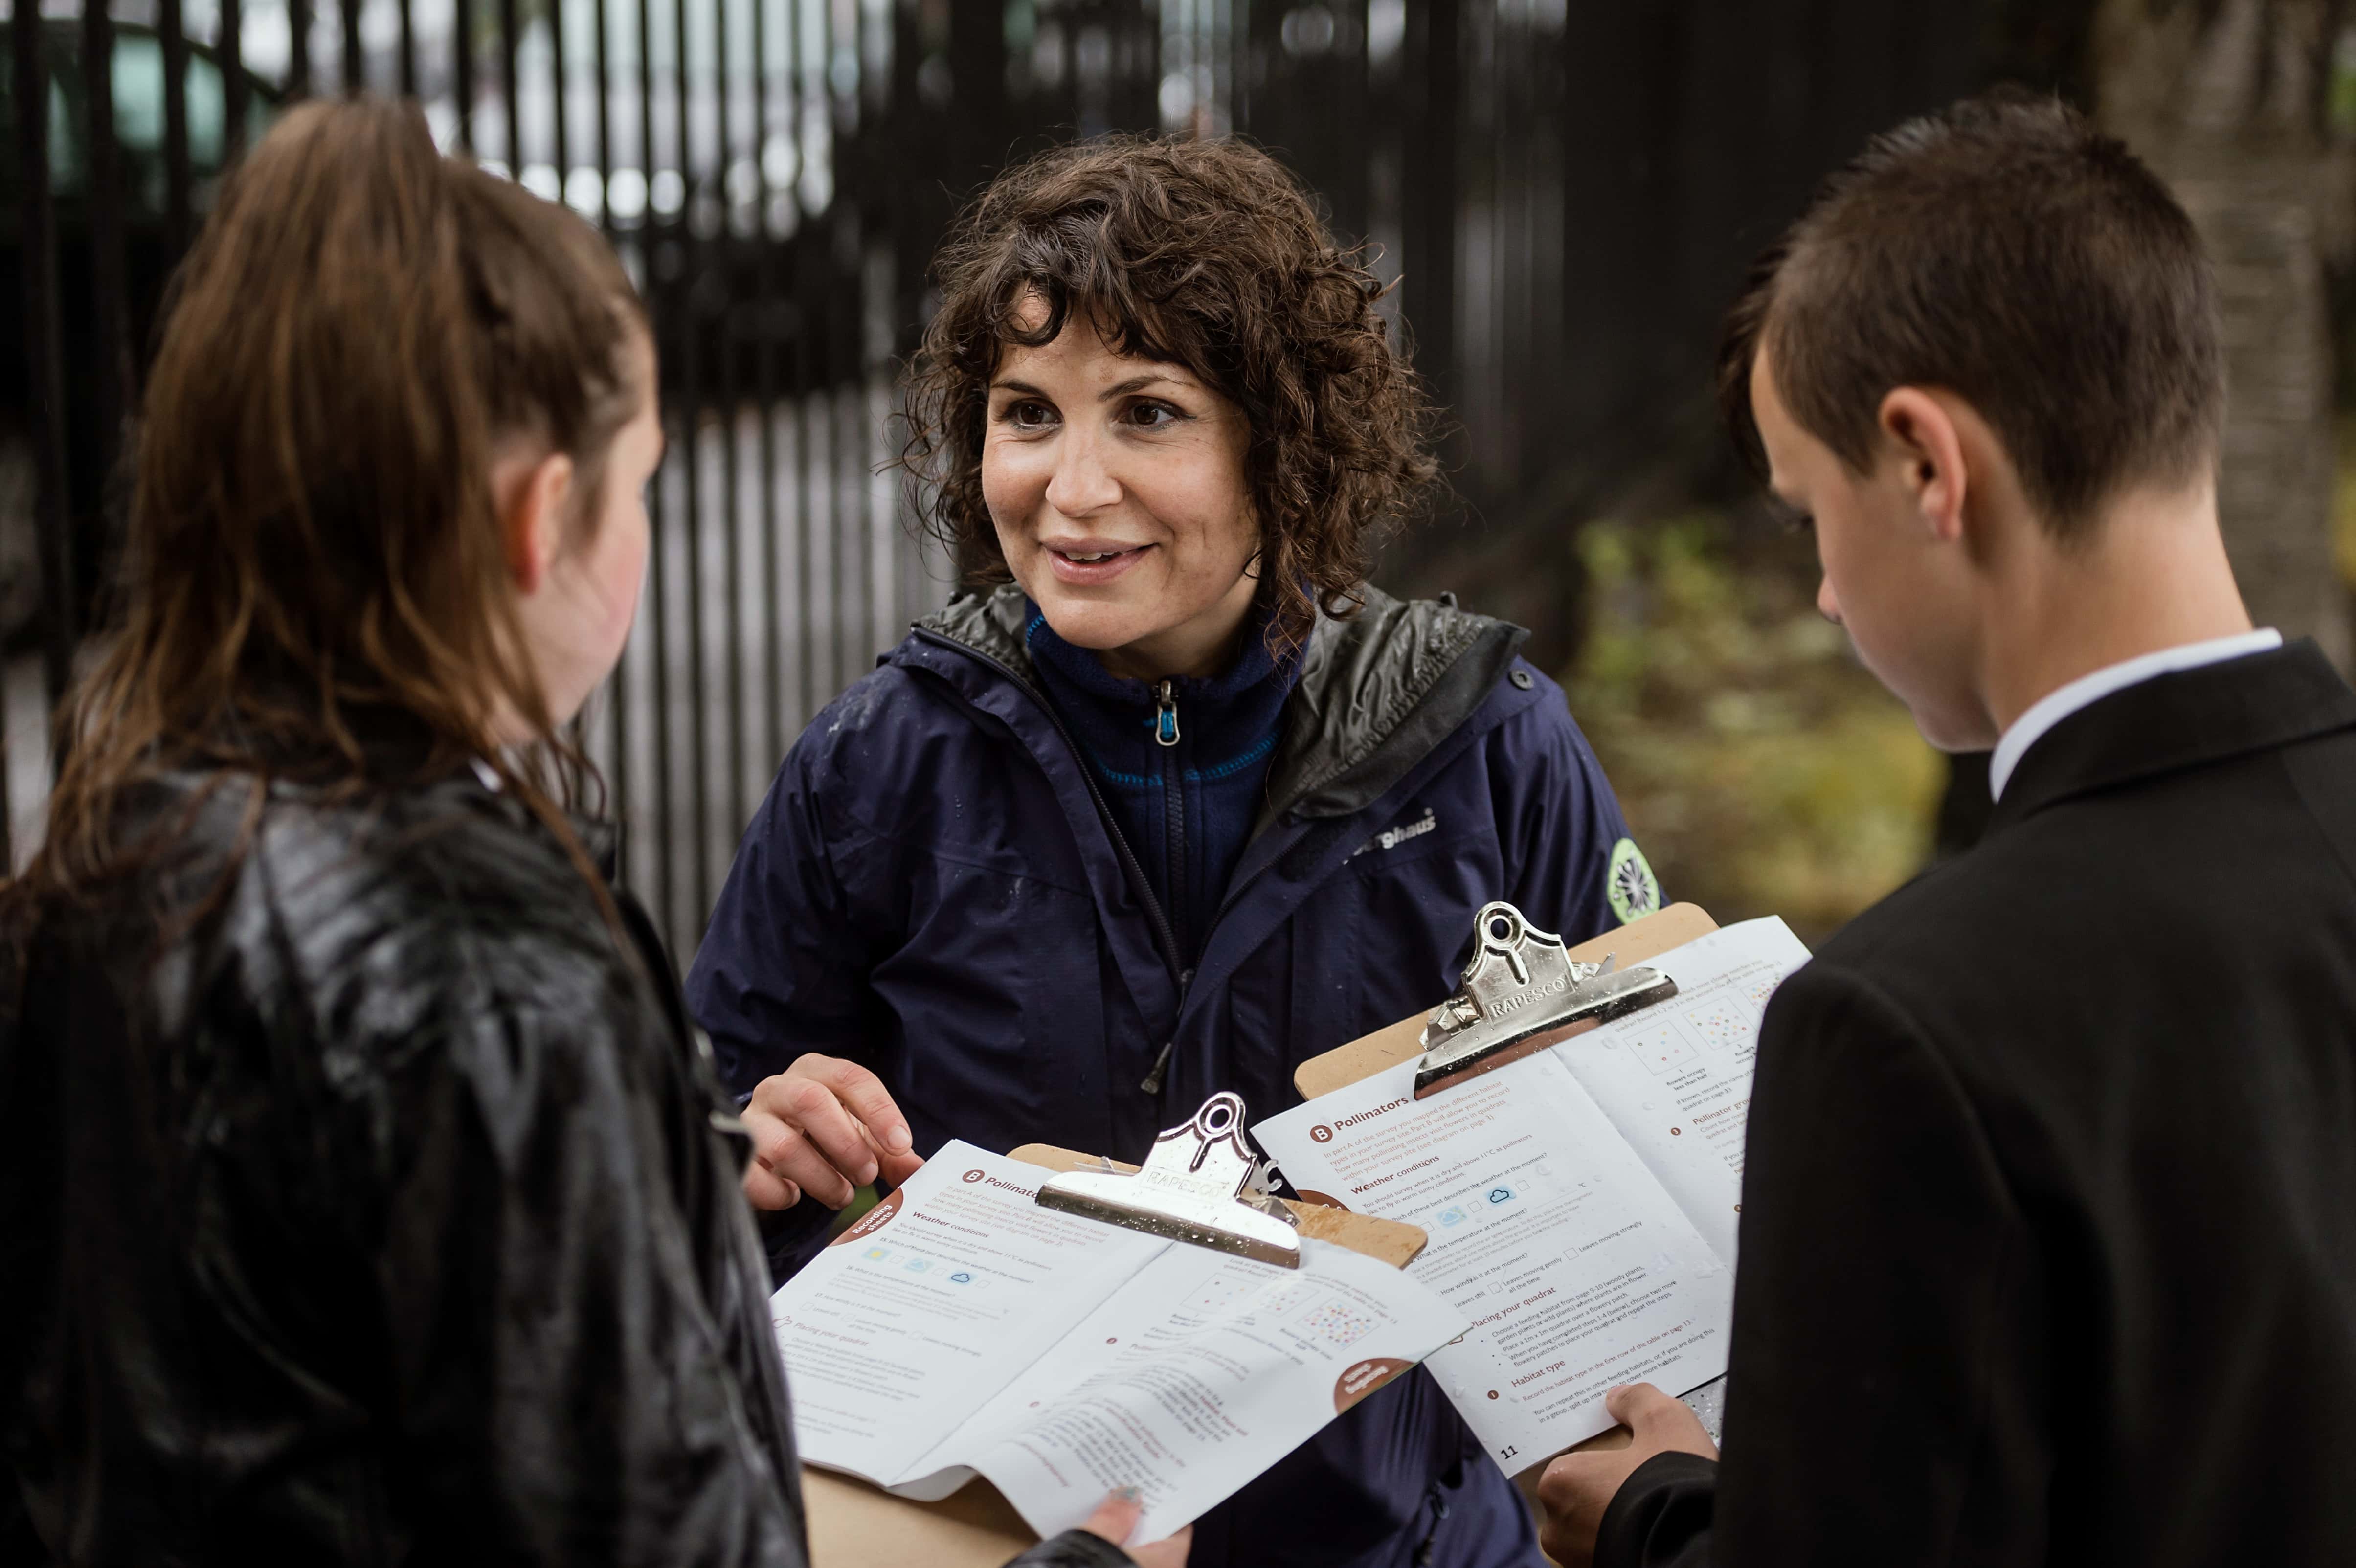 An adult and two teenagers look at checklists on clipboards working together outdoors.